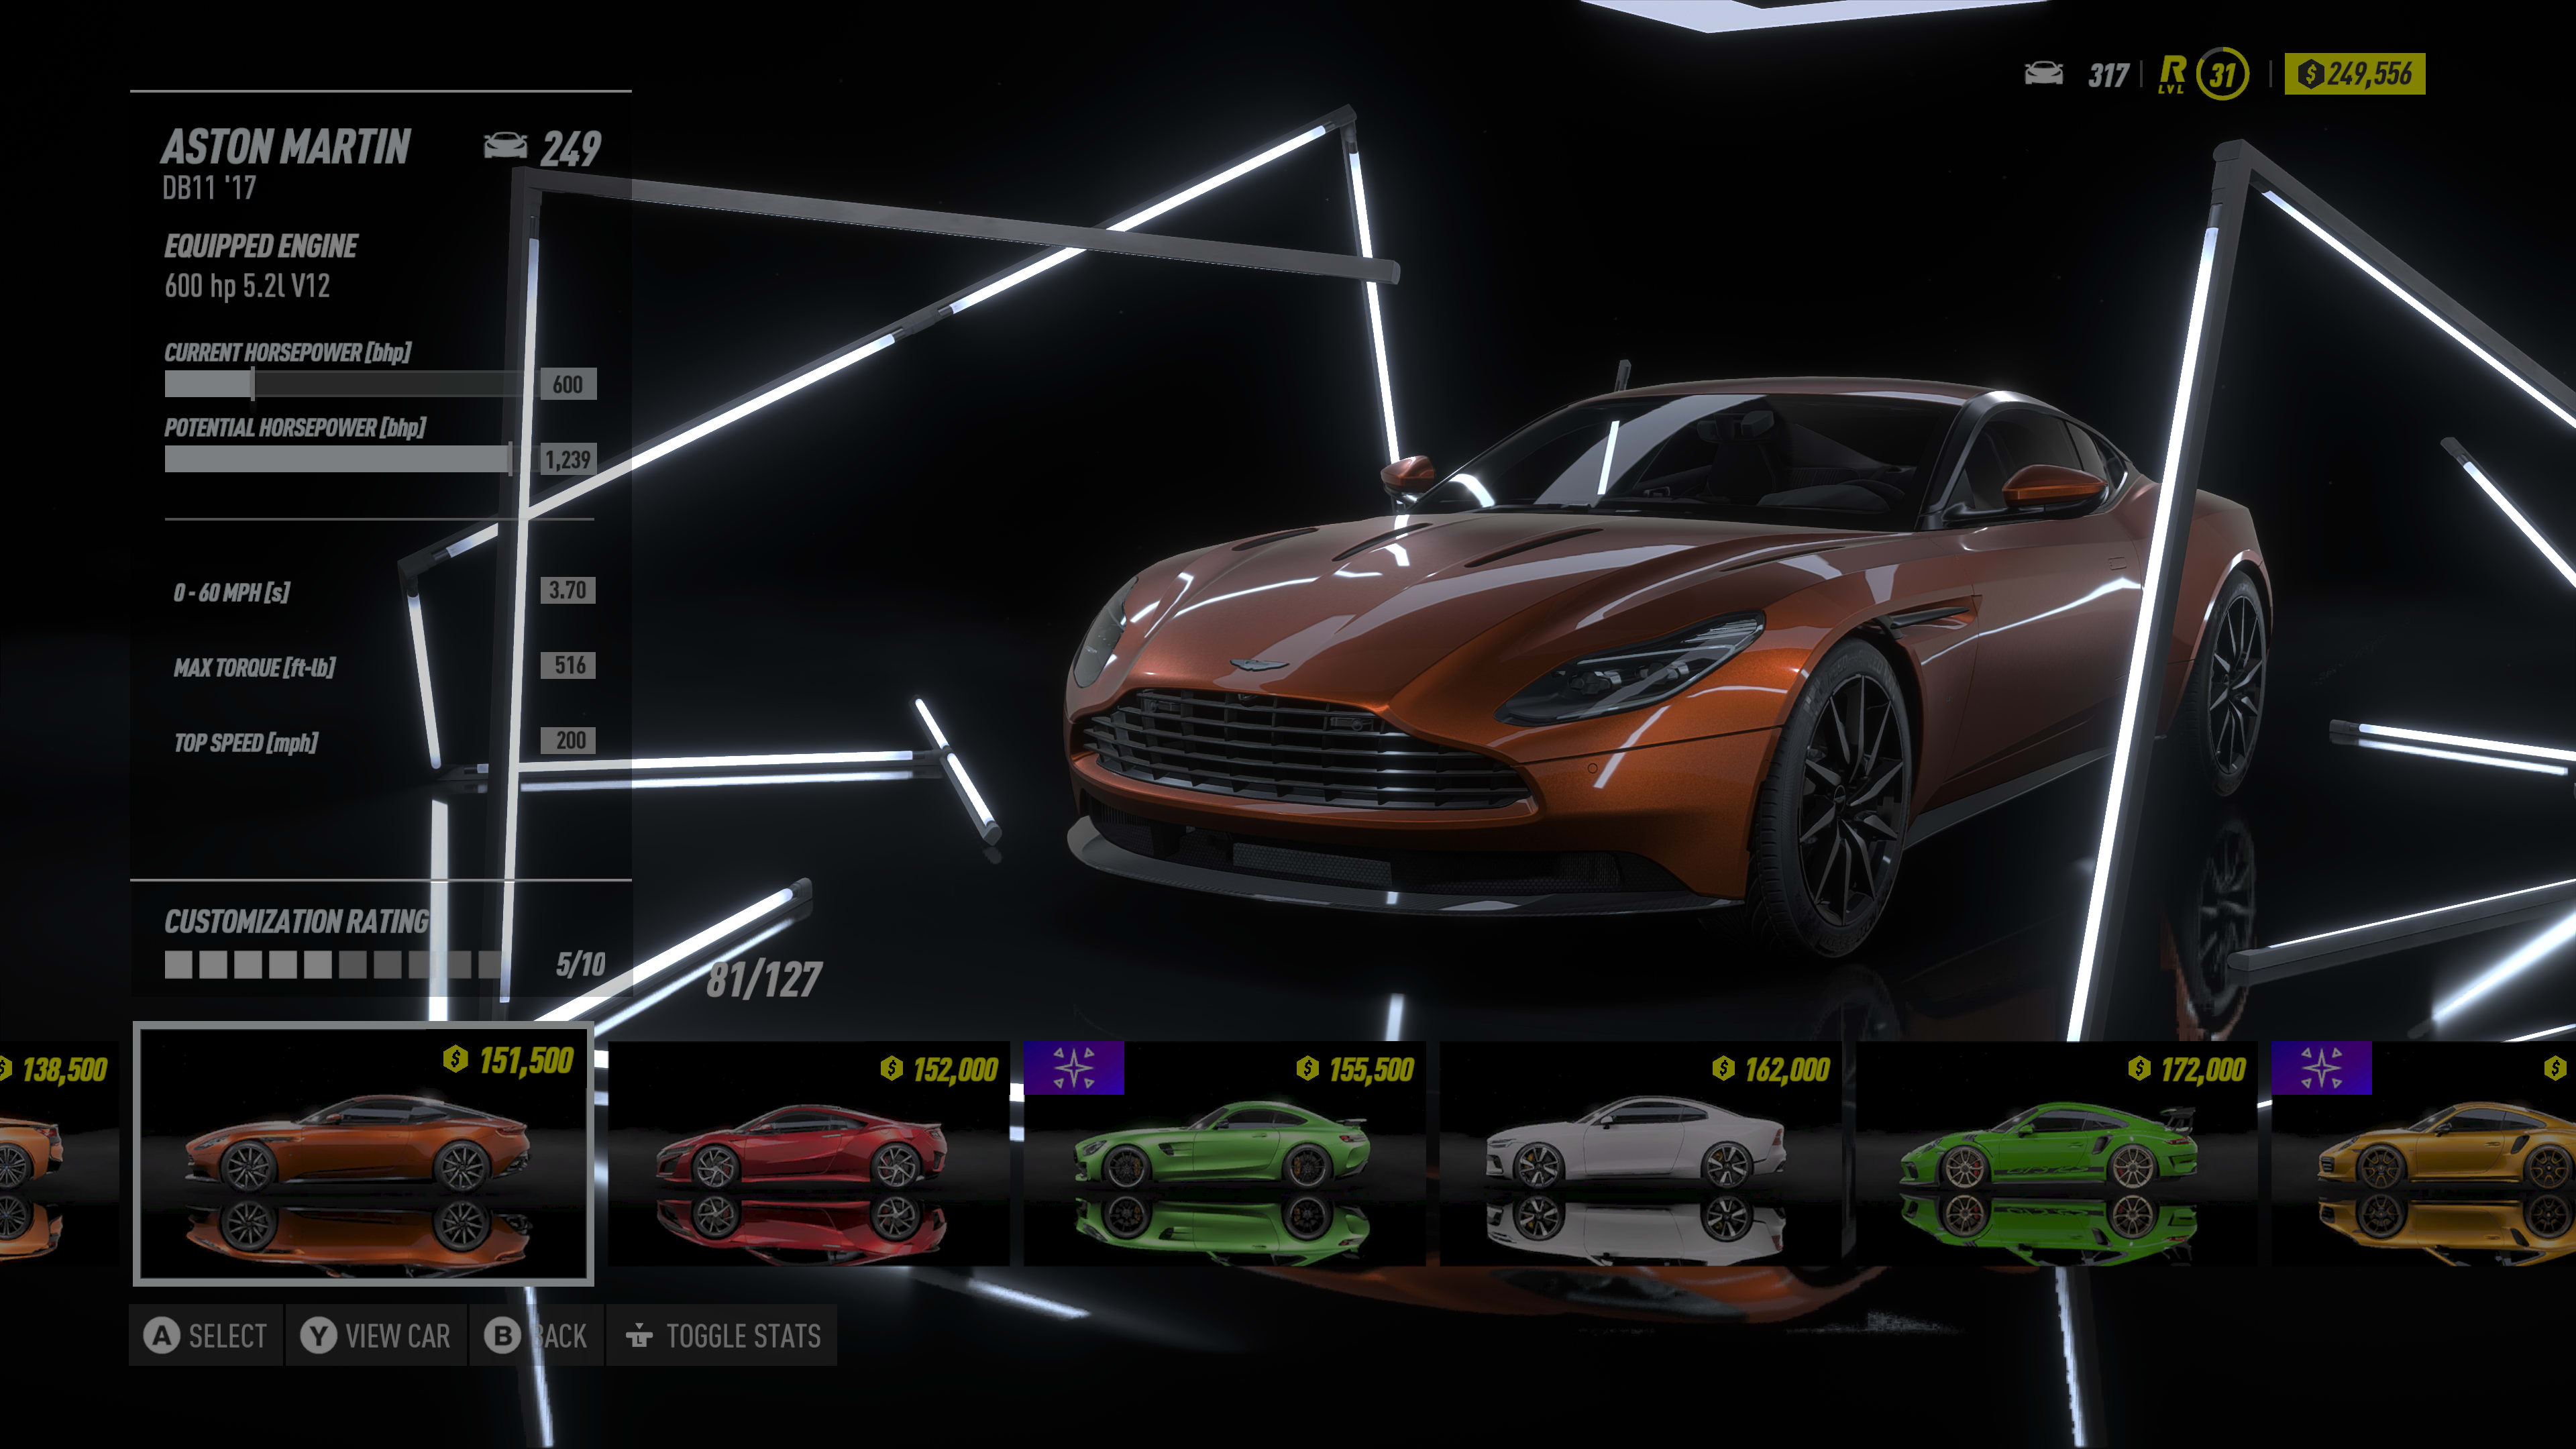 Need for Speed Heat best car: How to get a top vehicle